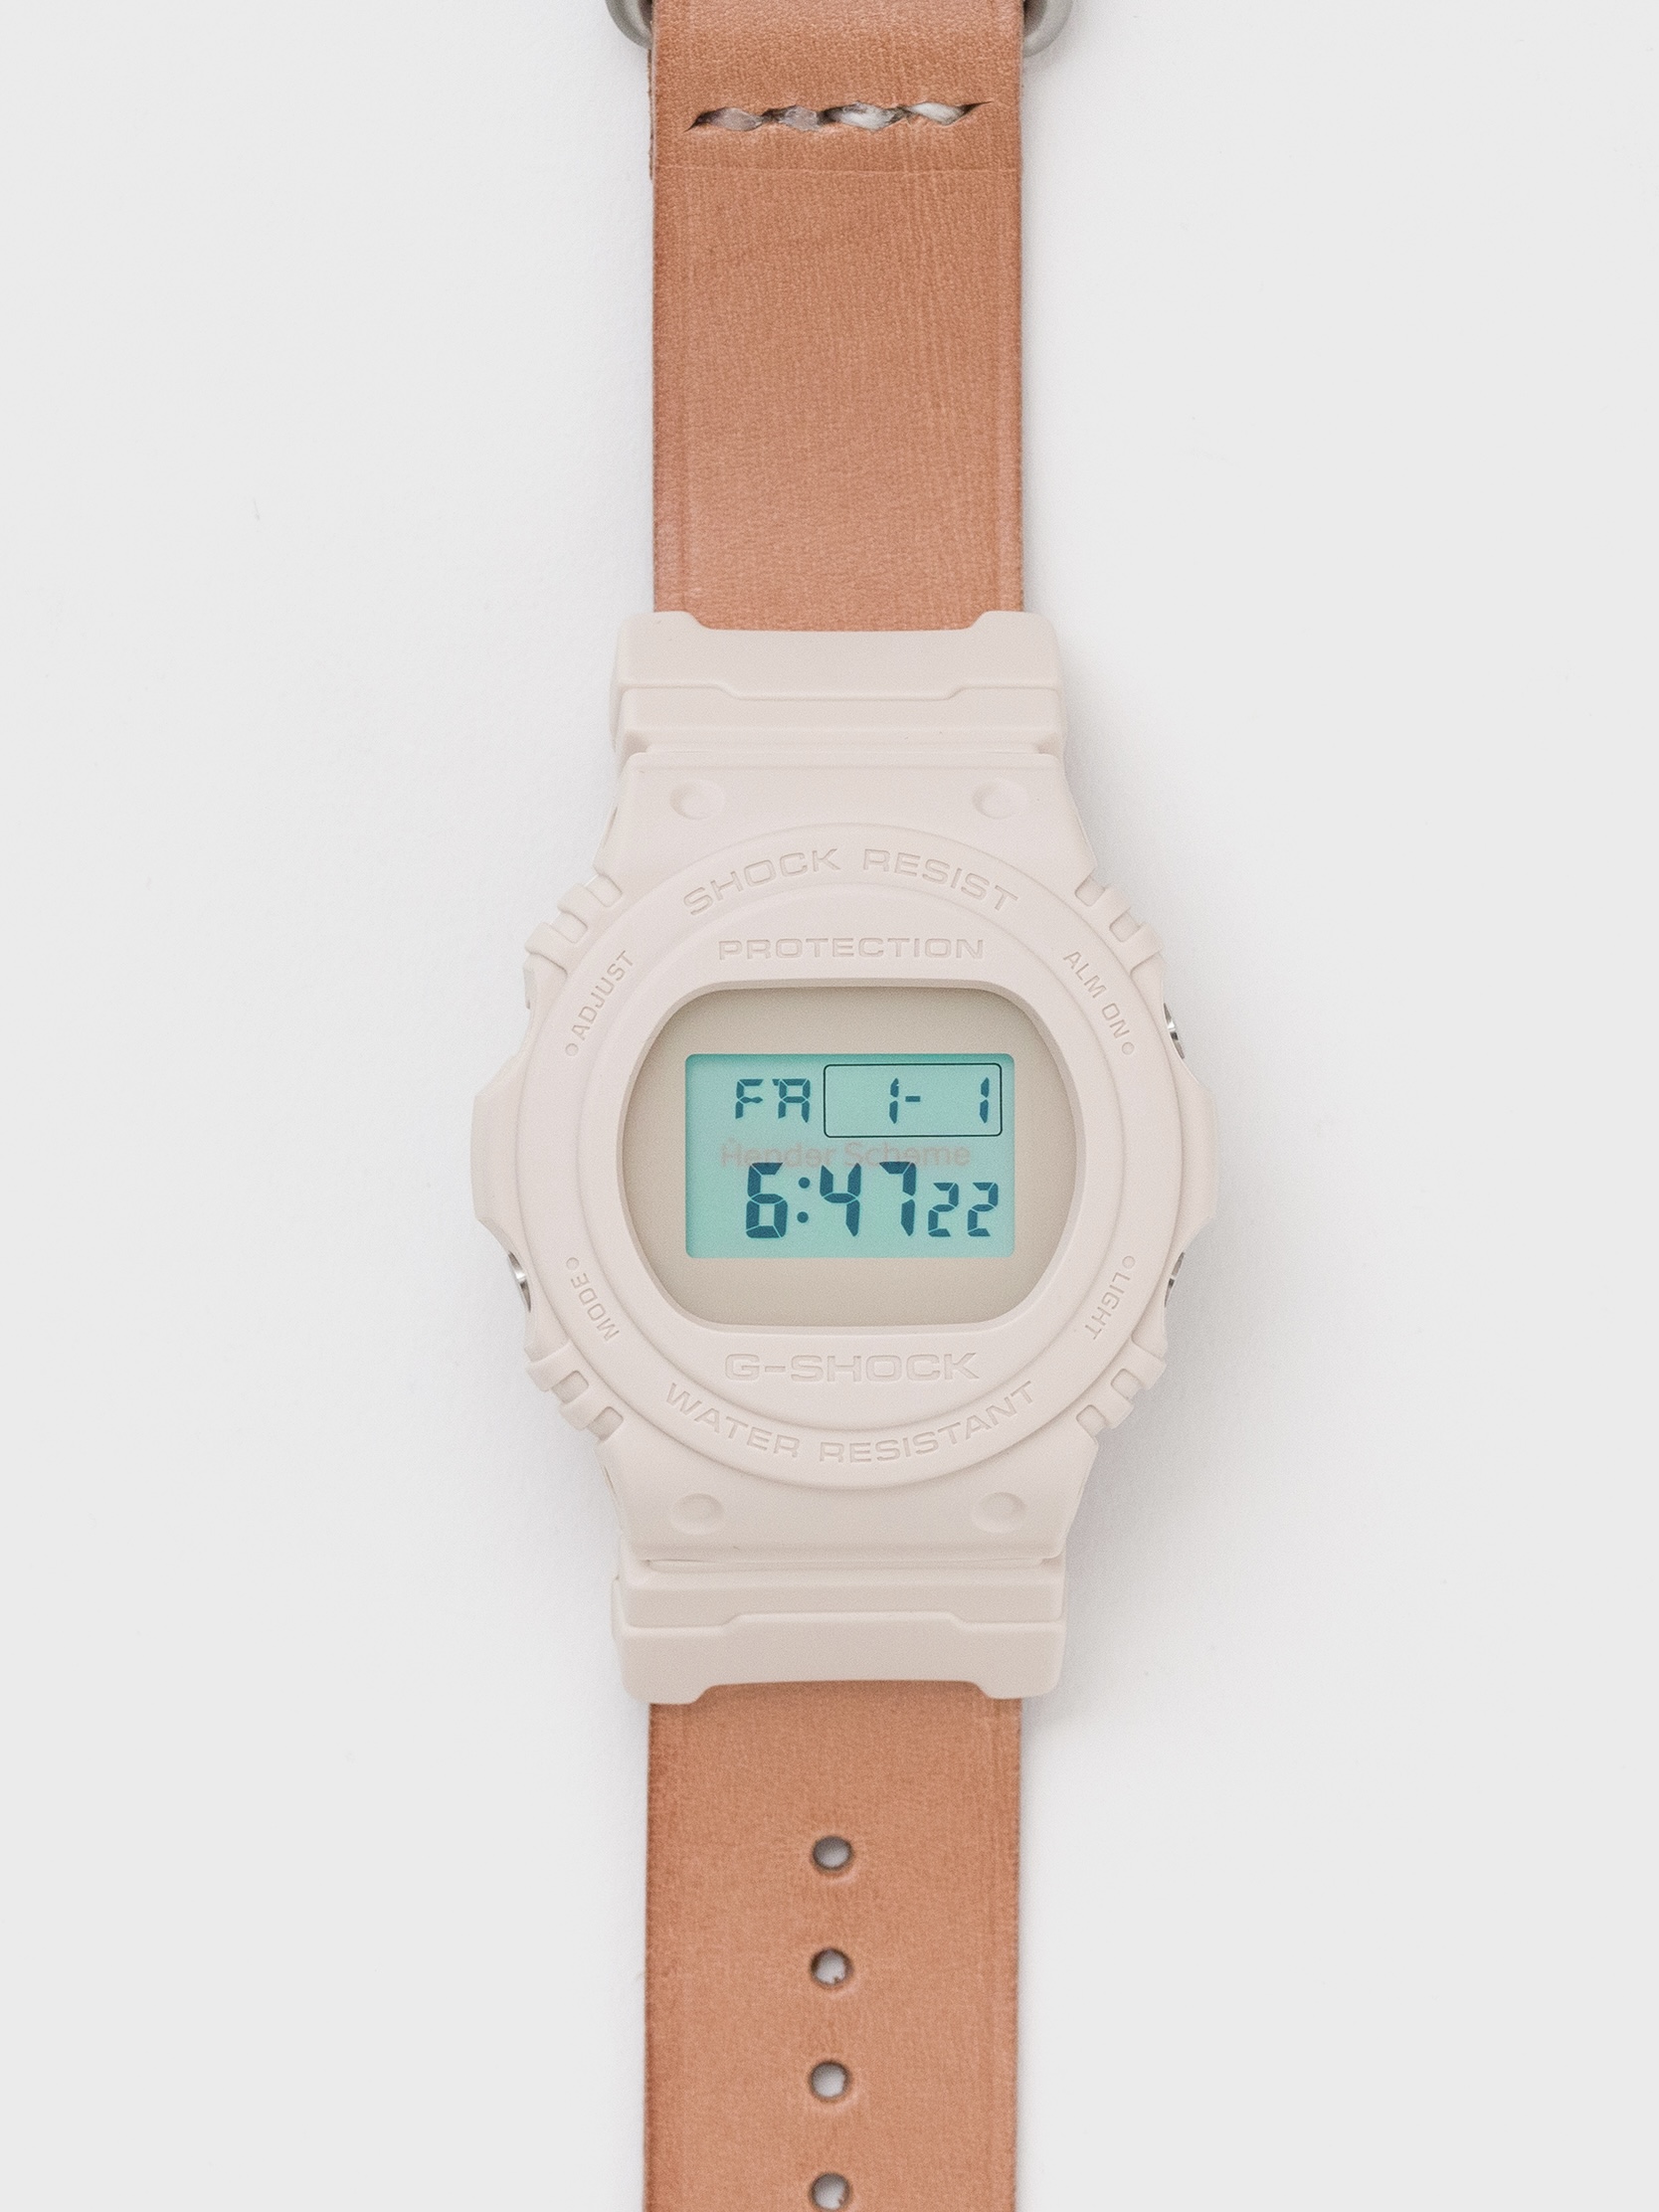 Hender Scheme and G-SHOCK collaborate to create a round-faced 